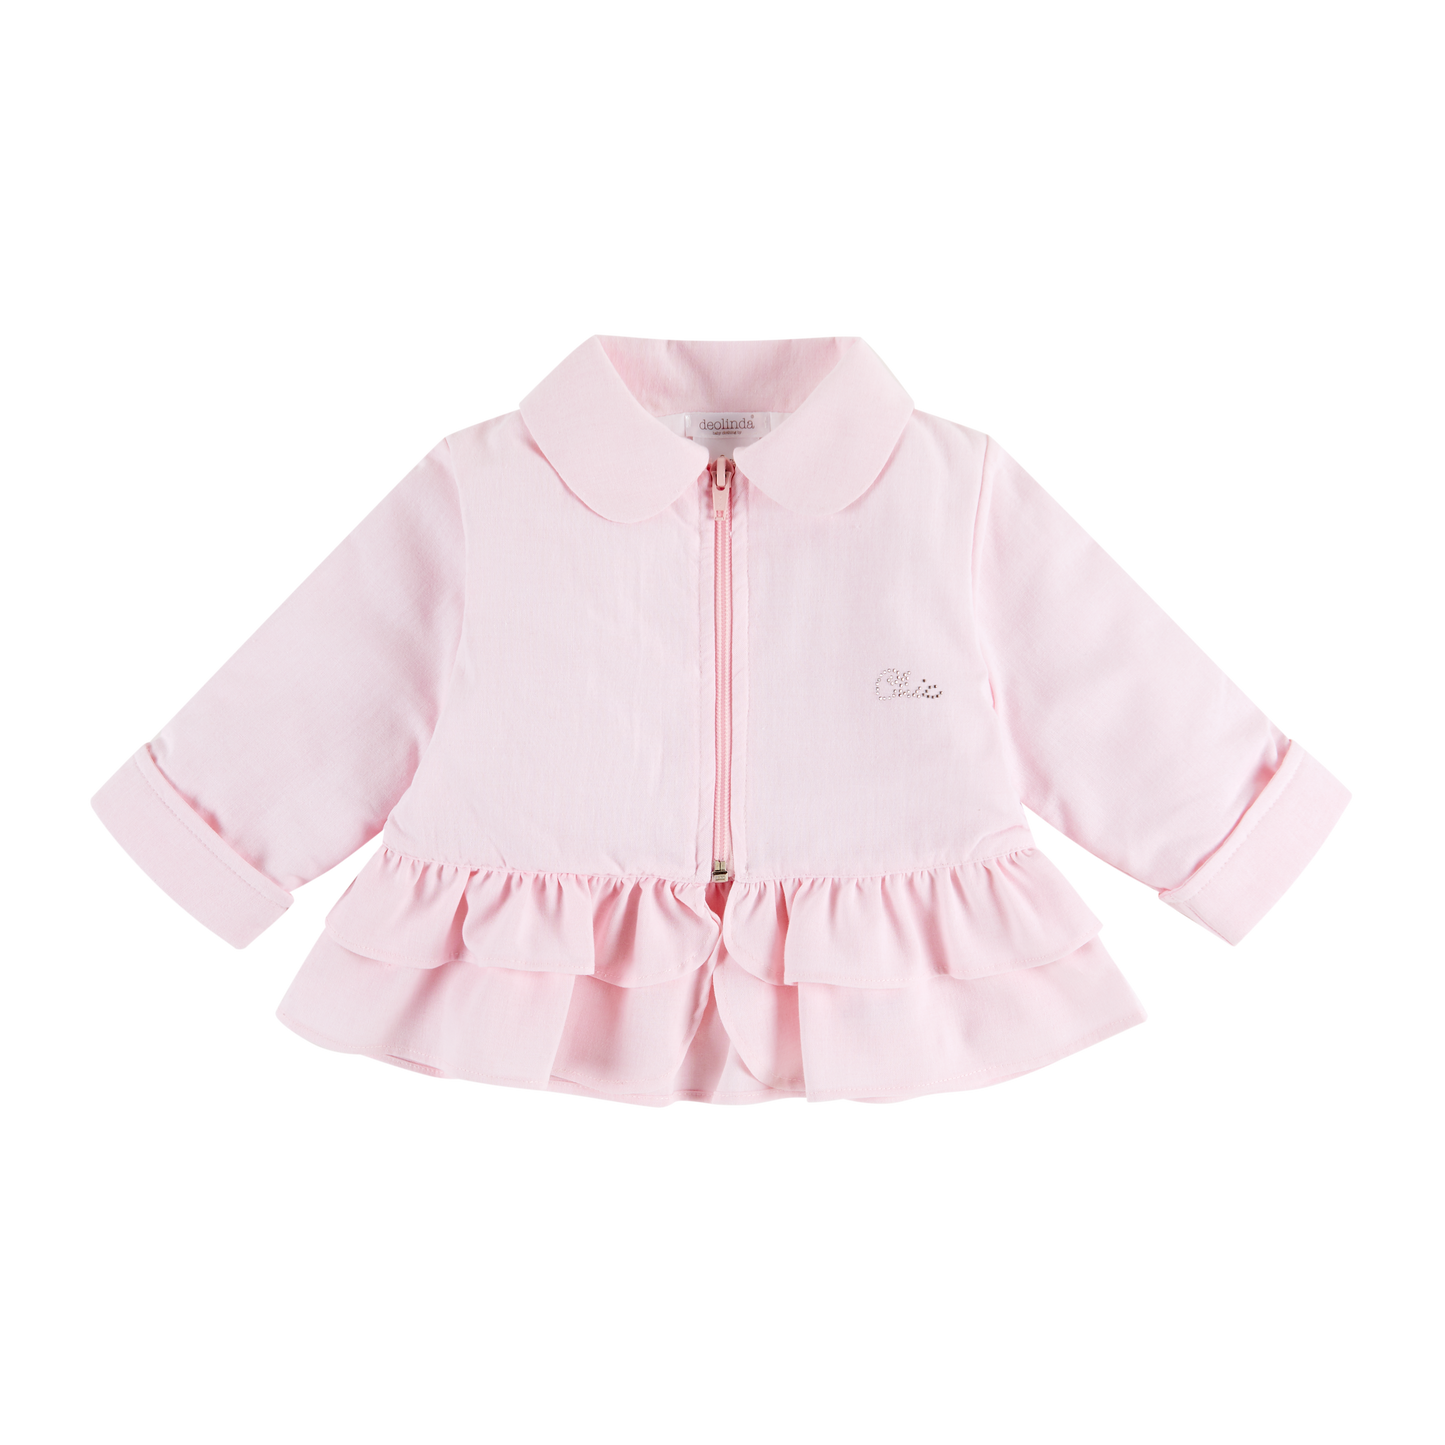 SS23 DEOLINDA Chic Baby Girls Pink Padded Jacket with Frill - 231105